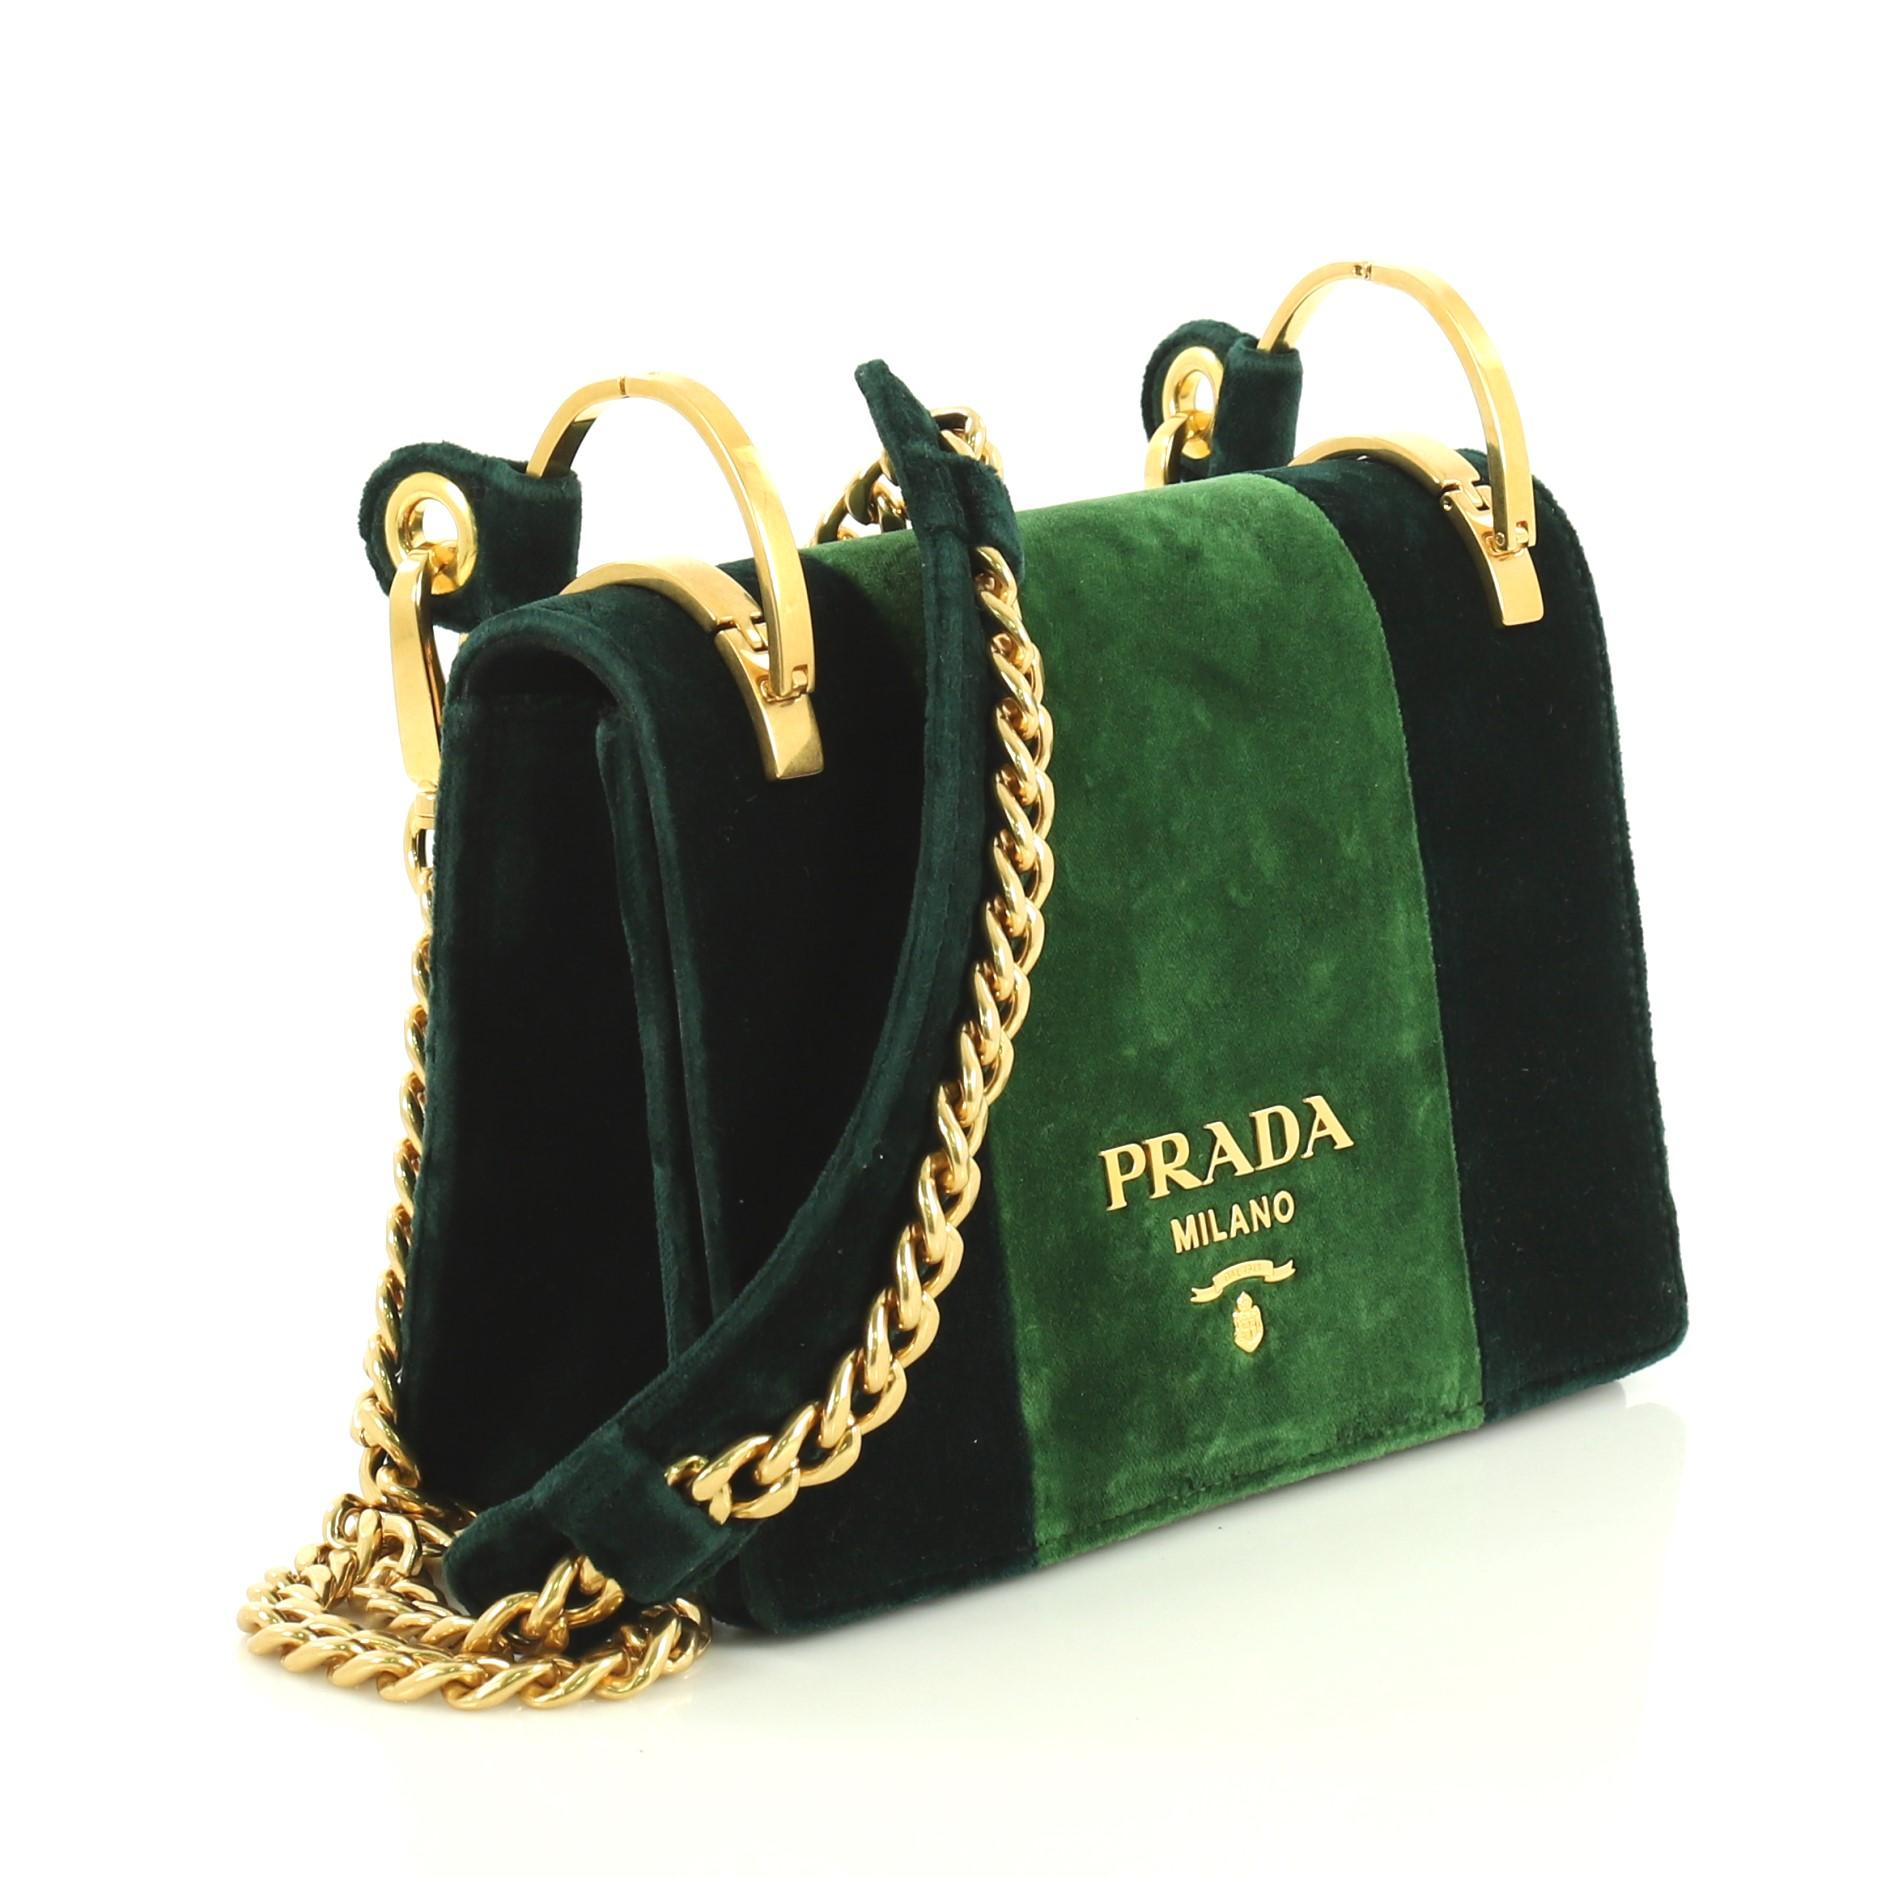 This Prada Cahier Shoulder Bag Velvet Small, crafted in green velvet, features chain link strap with shoulder pad, frontal flap and gold-tone hardware. Its magnetic snap closure opens to a black fabric and green microfiber interior with slip